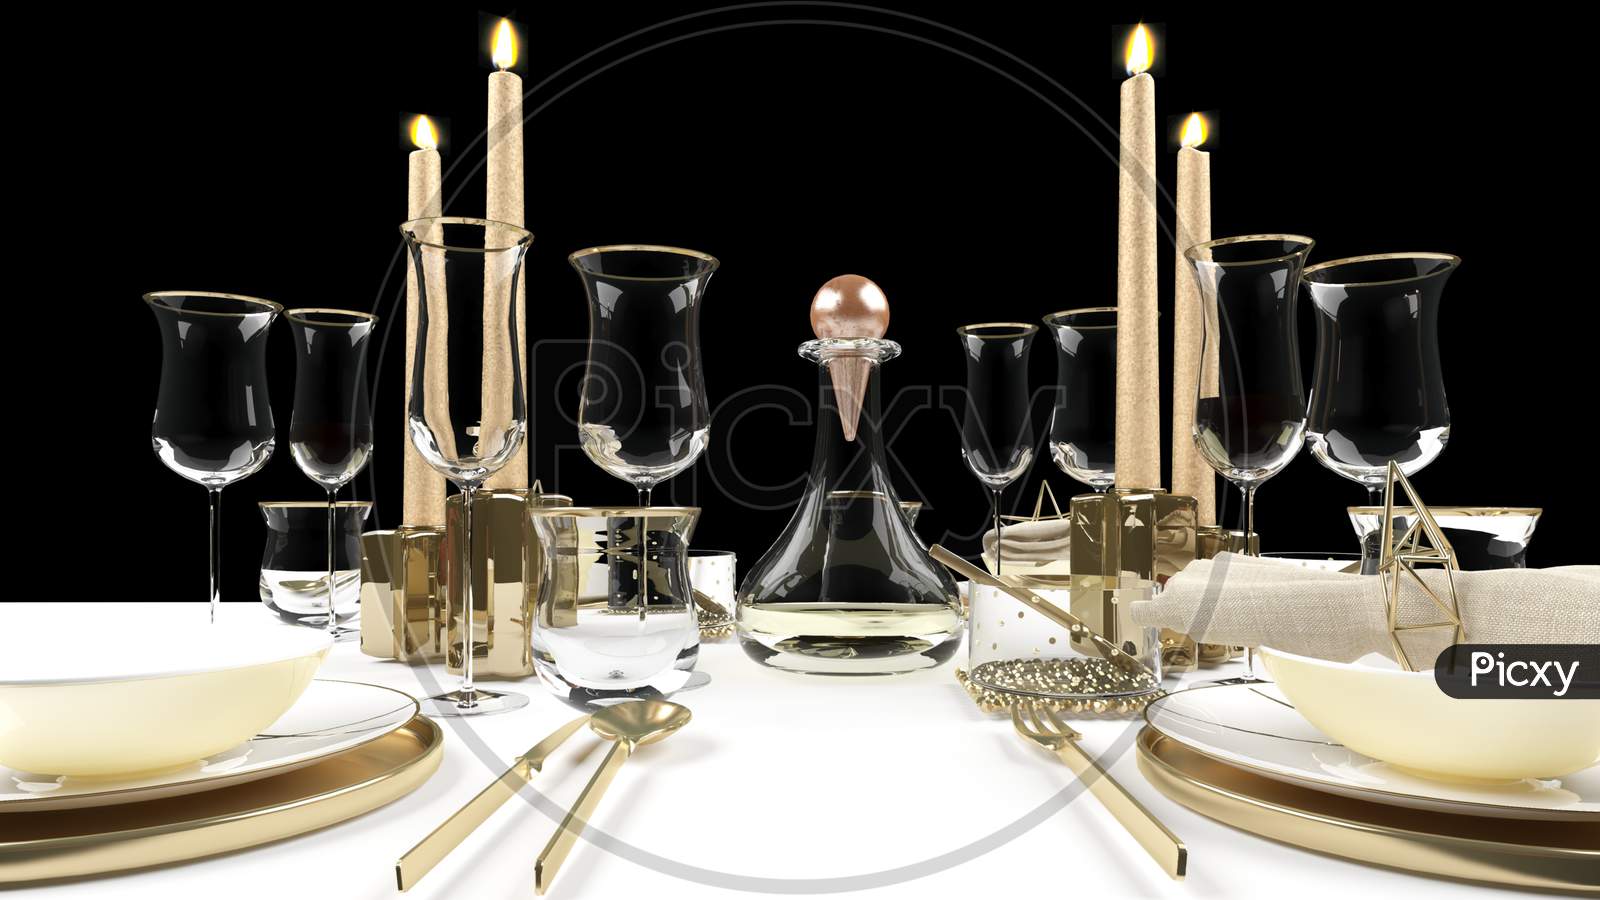 Elegant Dinning Table With Wine Glasses, Plates And Candles Set For Christmas.